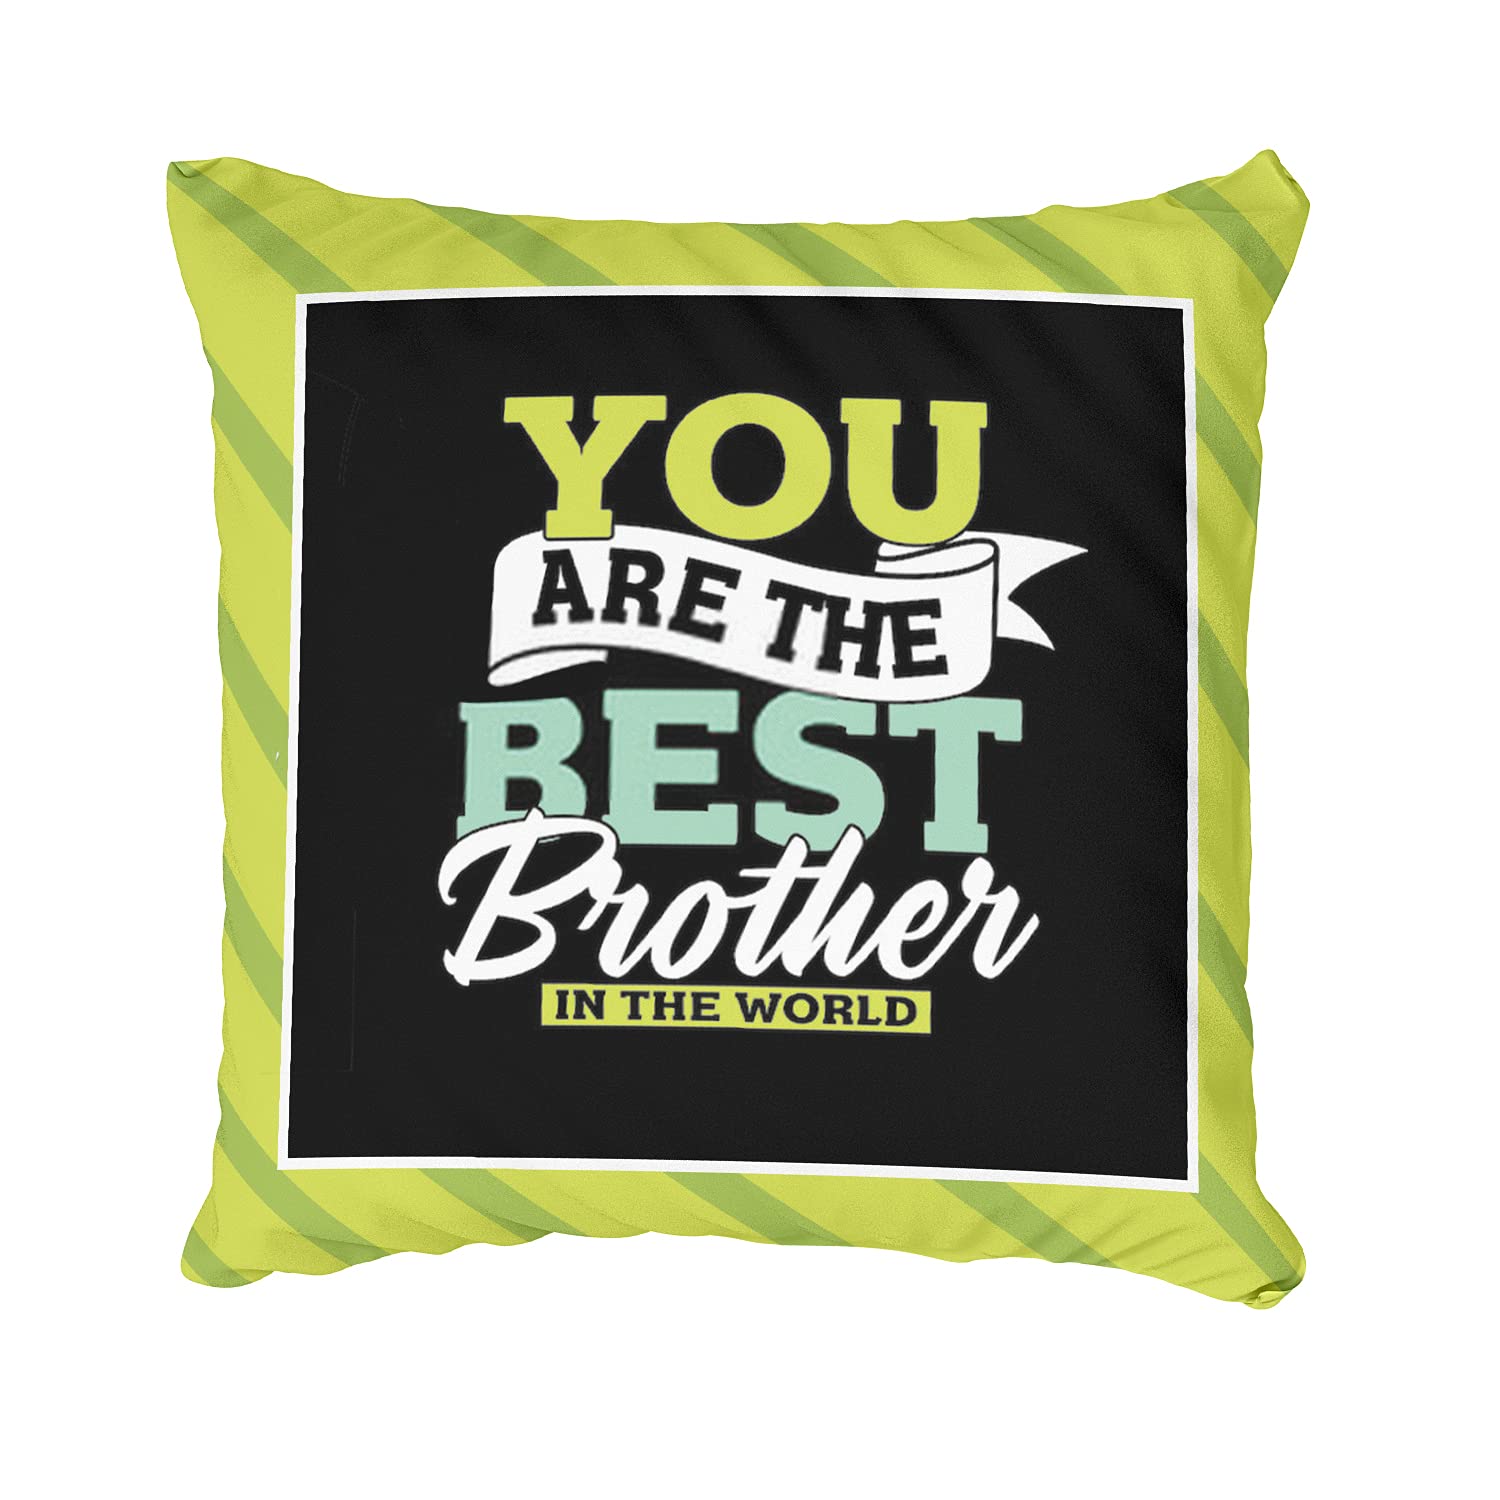 brother cushions